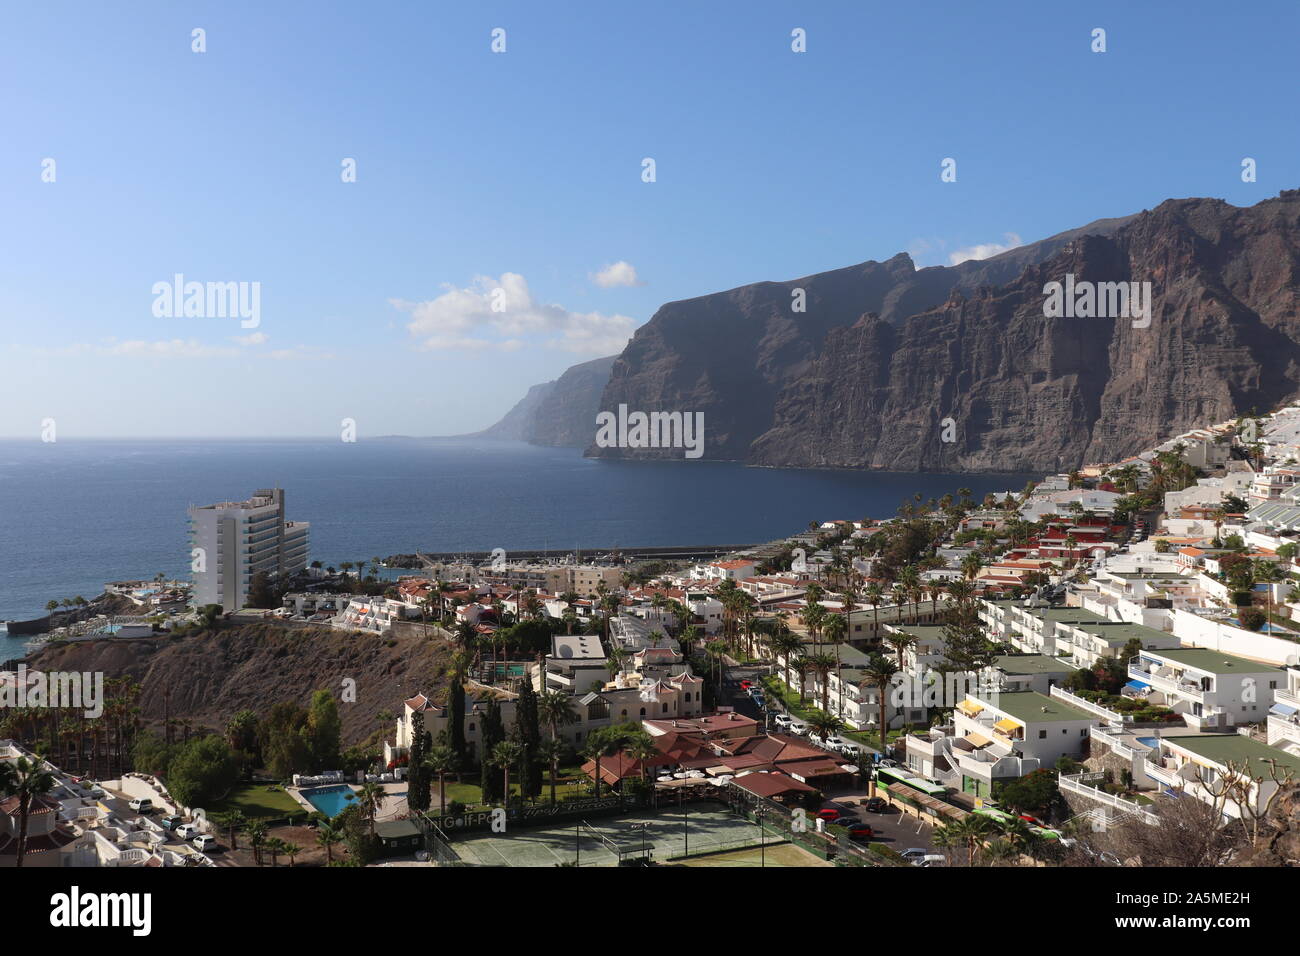 Cliffs towering over the town of Los Gigantes Stock Photo